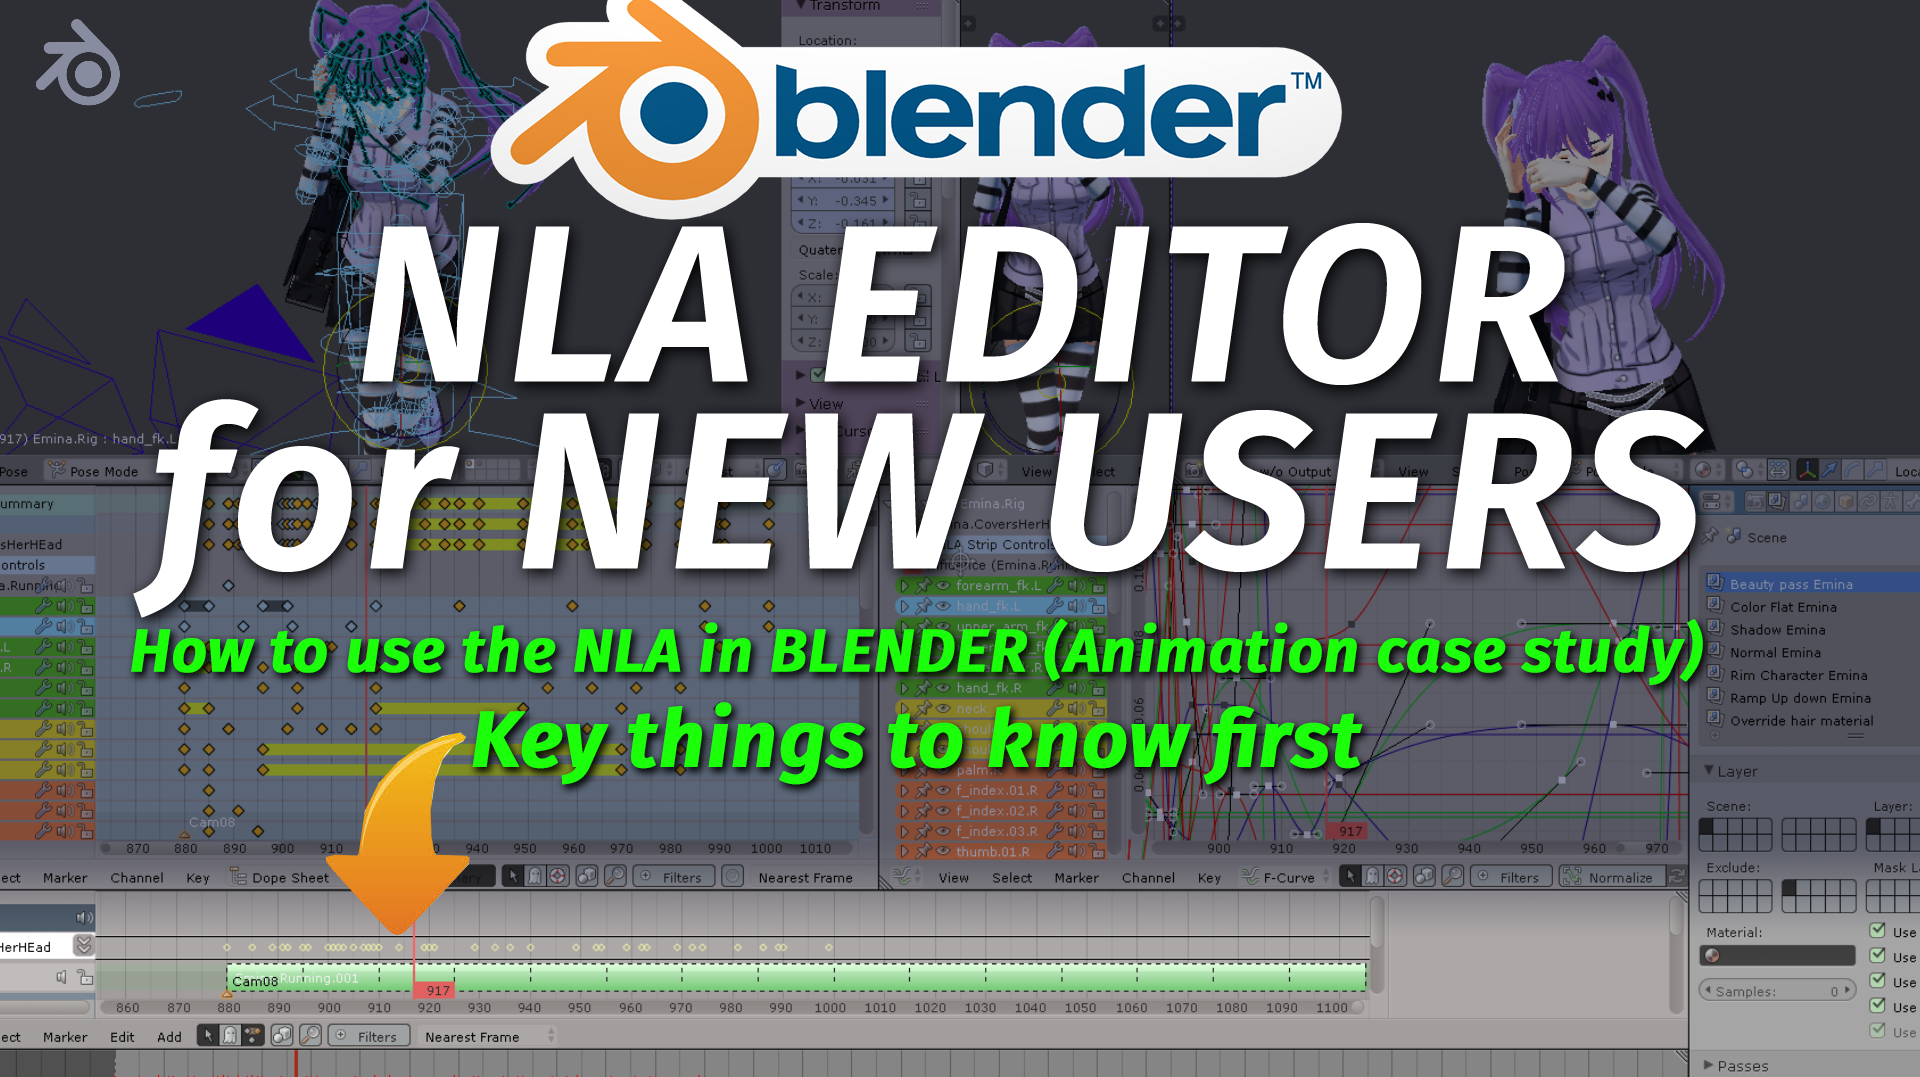 How to use the NLA in Blender